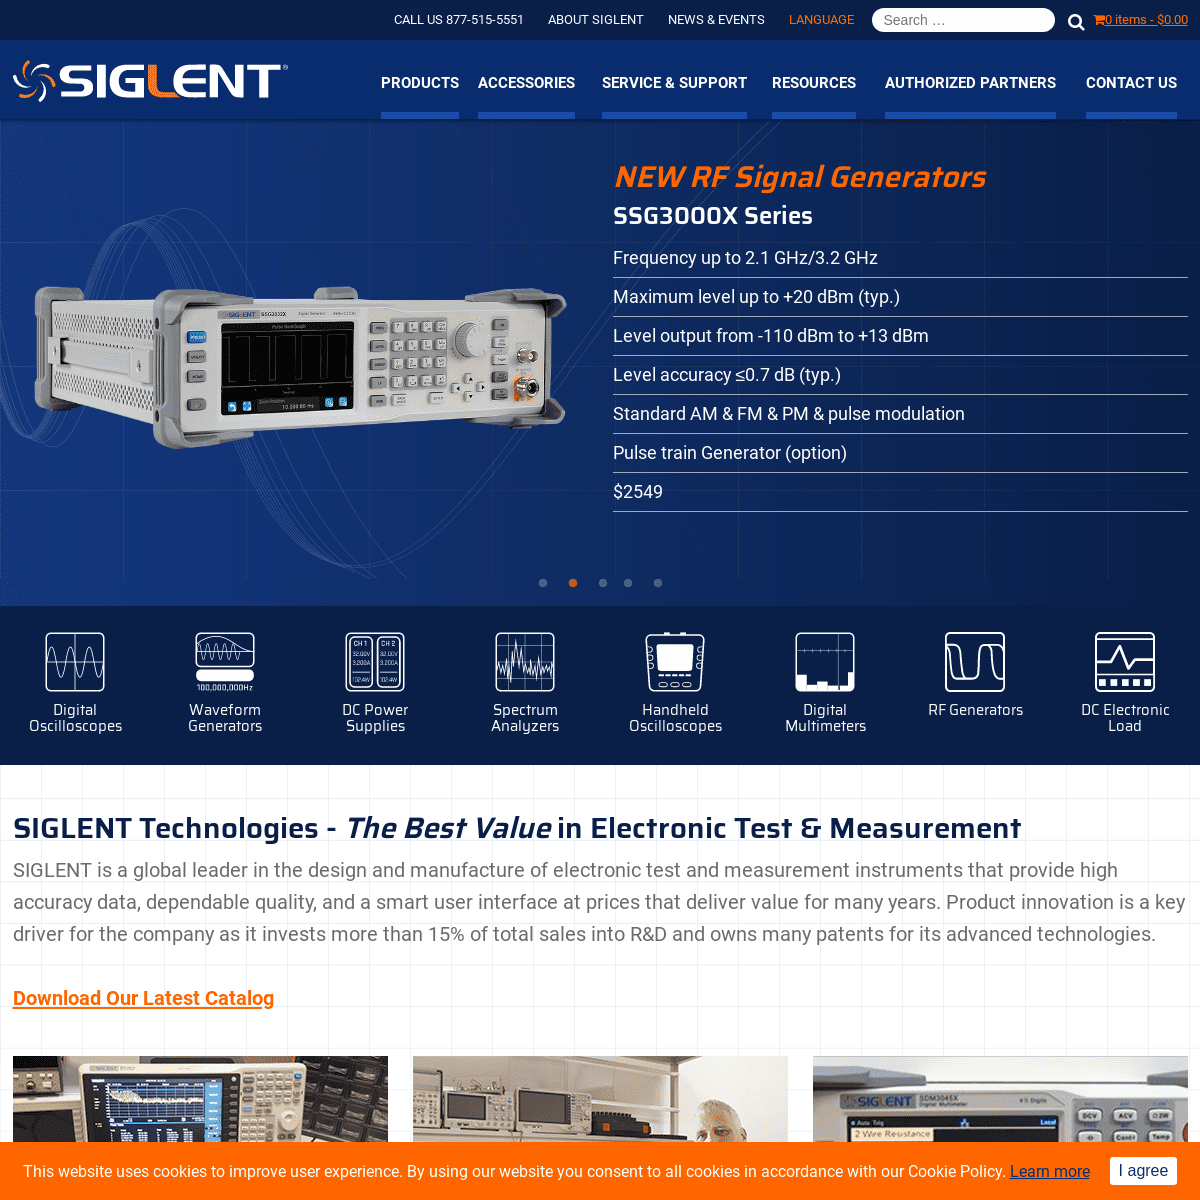 SIGLENT Technologies - Electronic Test and Measurement Instruments